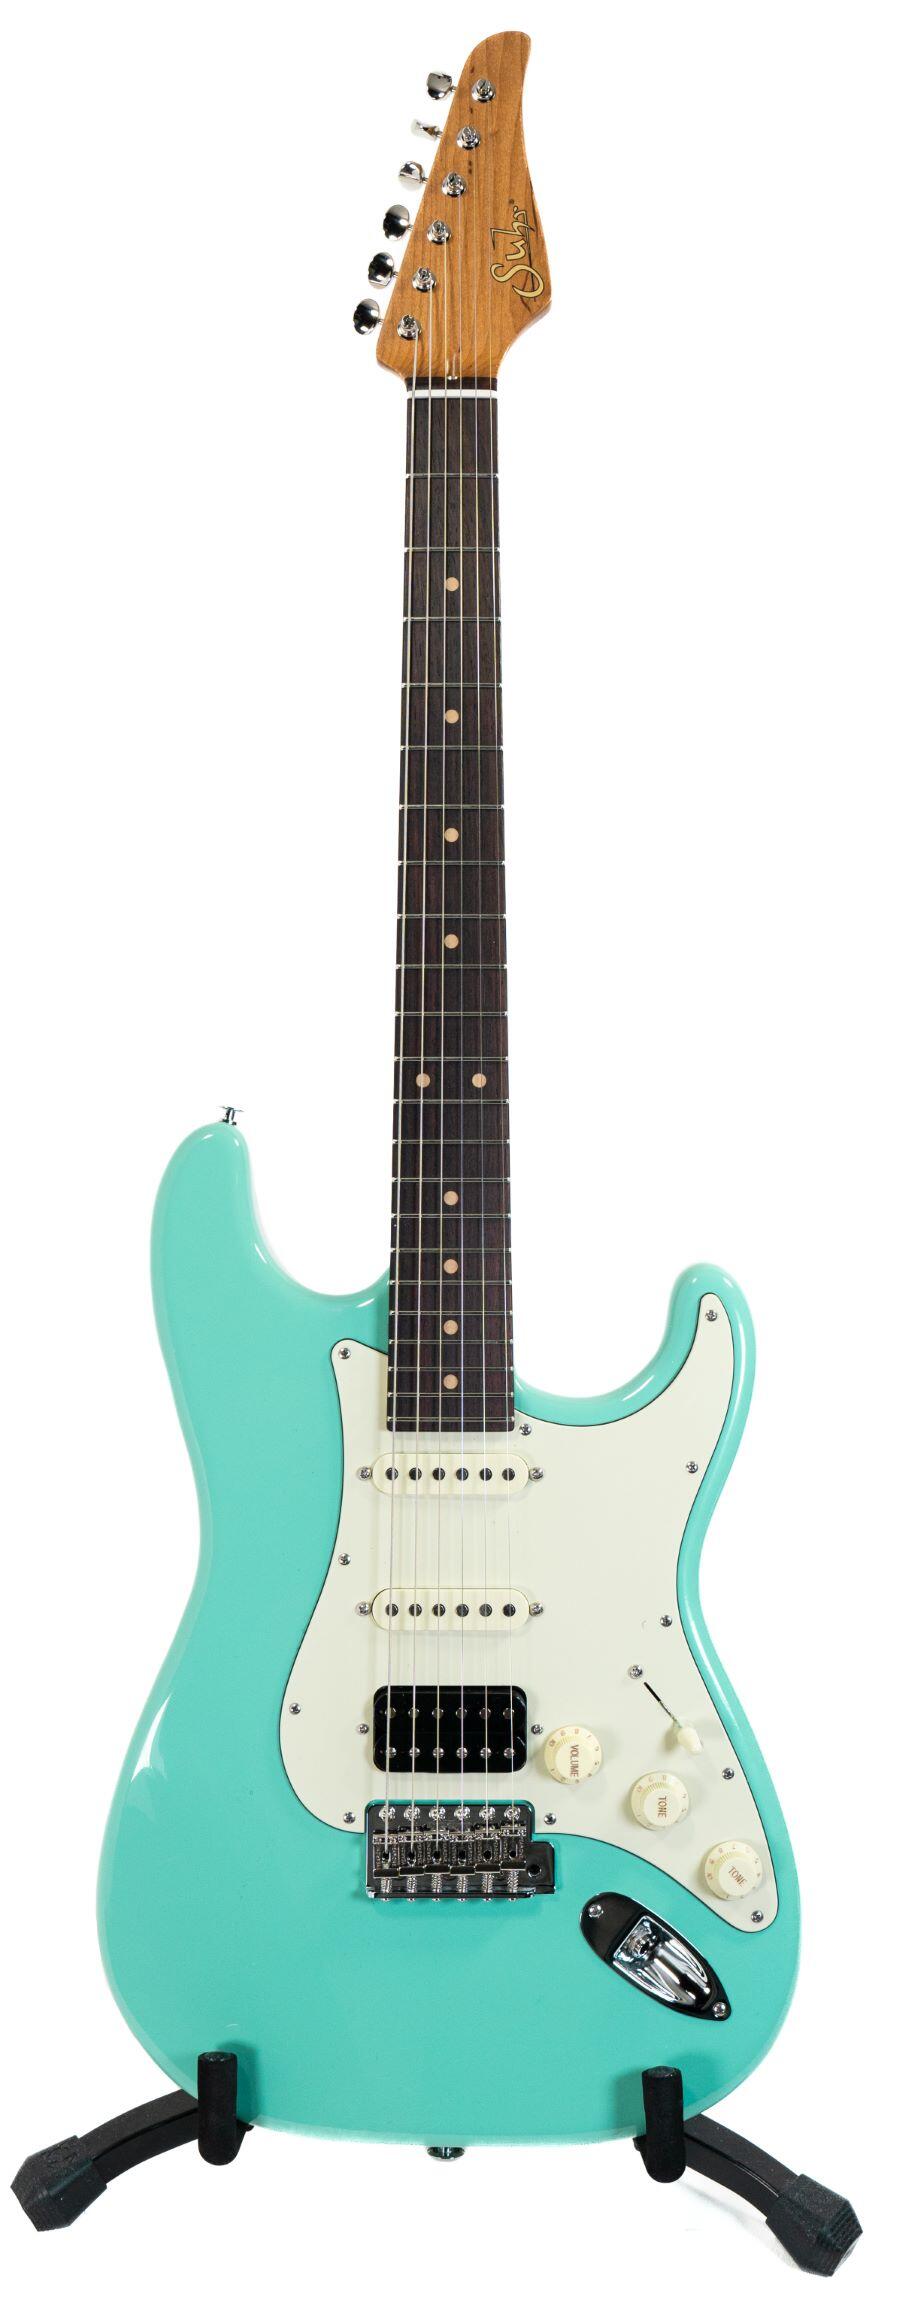 Suhr Guitars CLASSIC S Vintage Limited Edition, Seafoam Green : photo 1